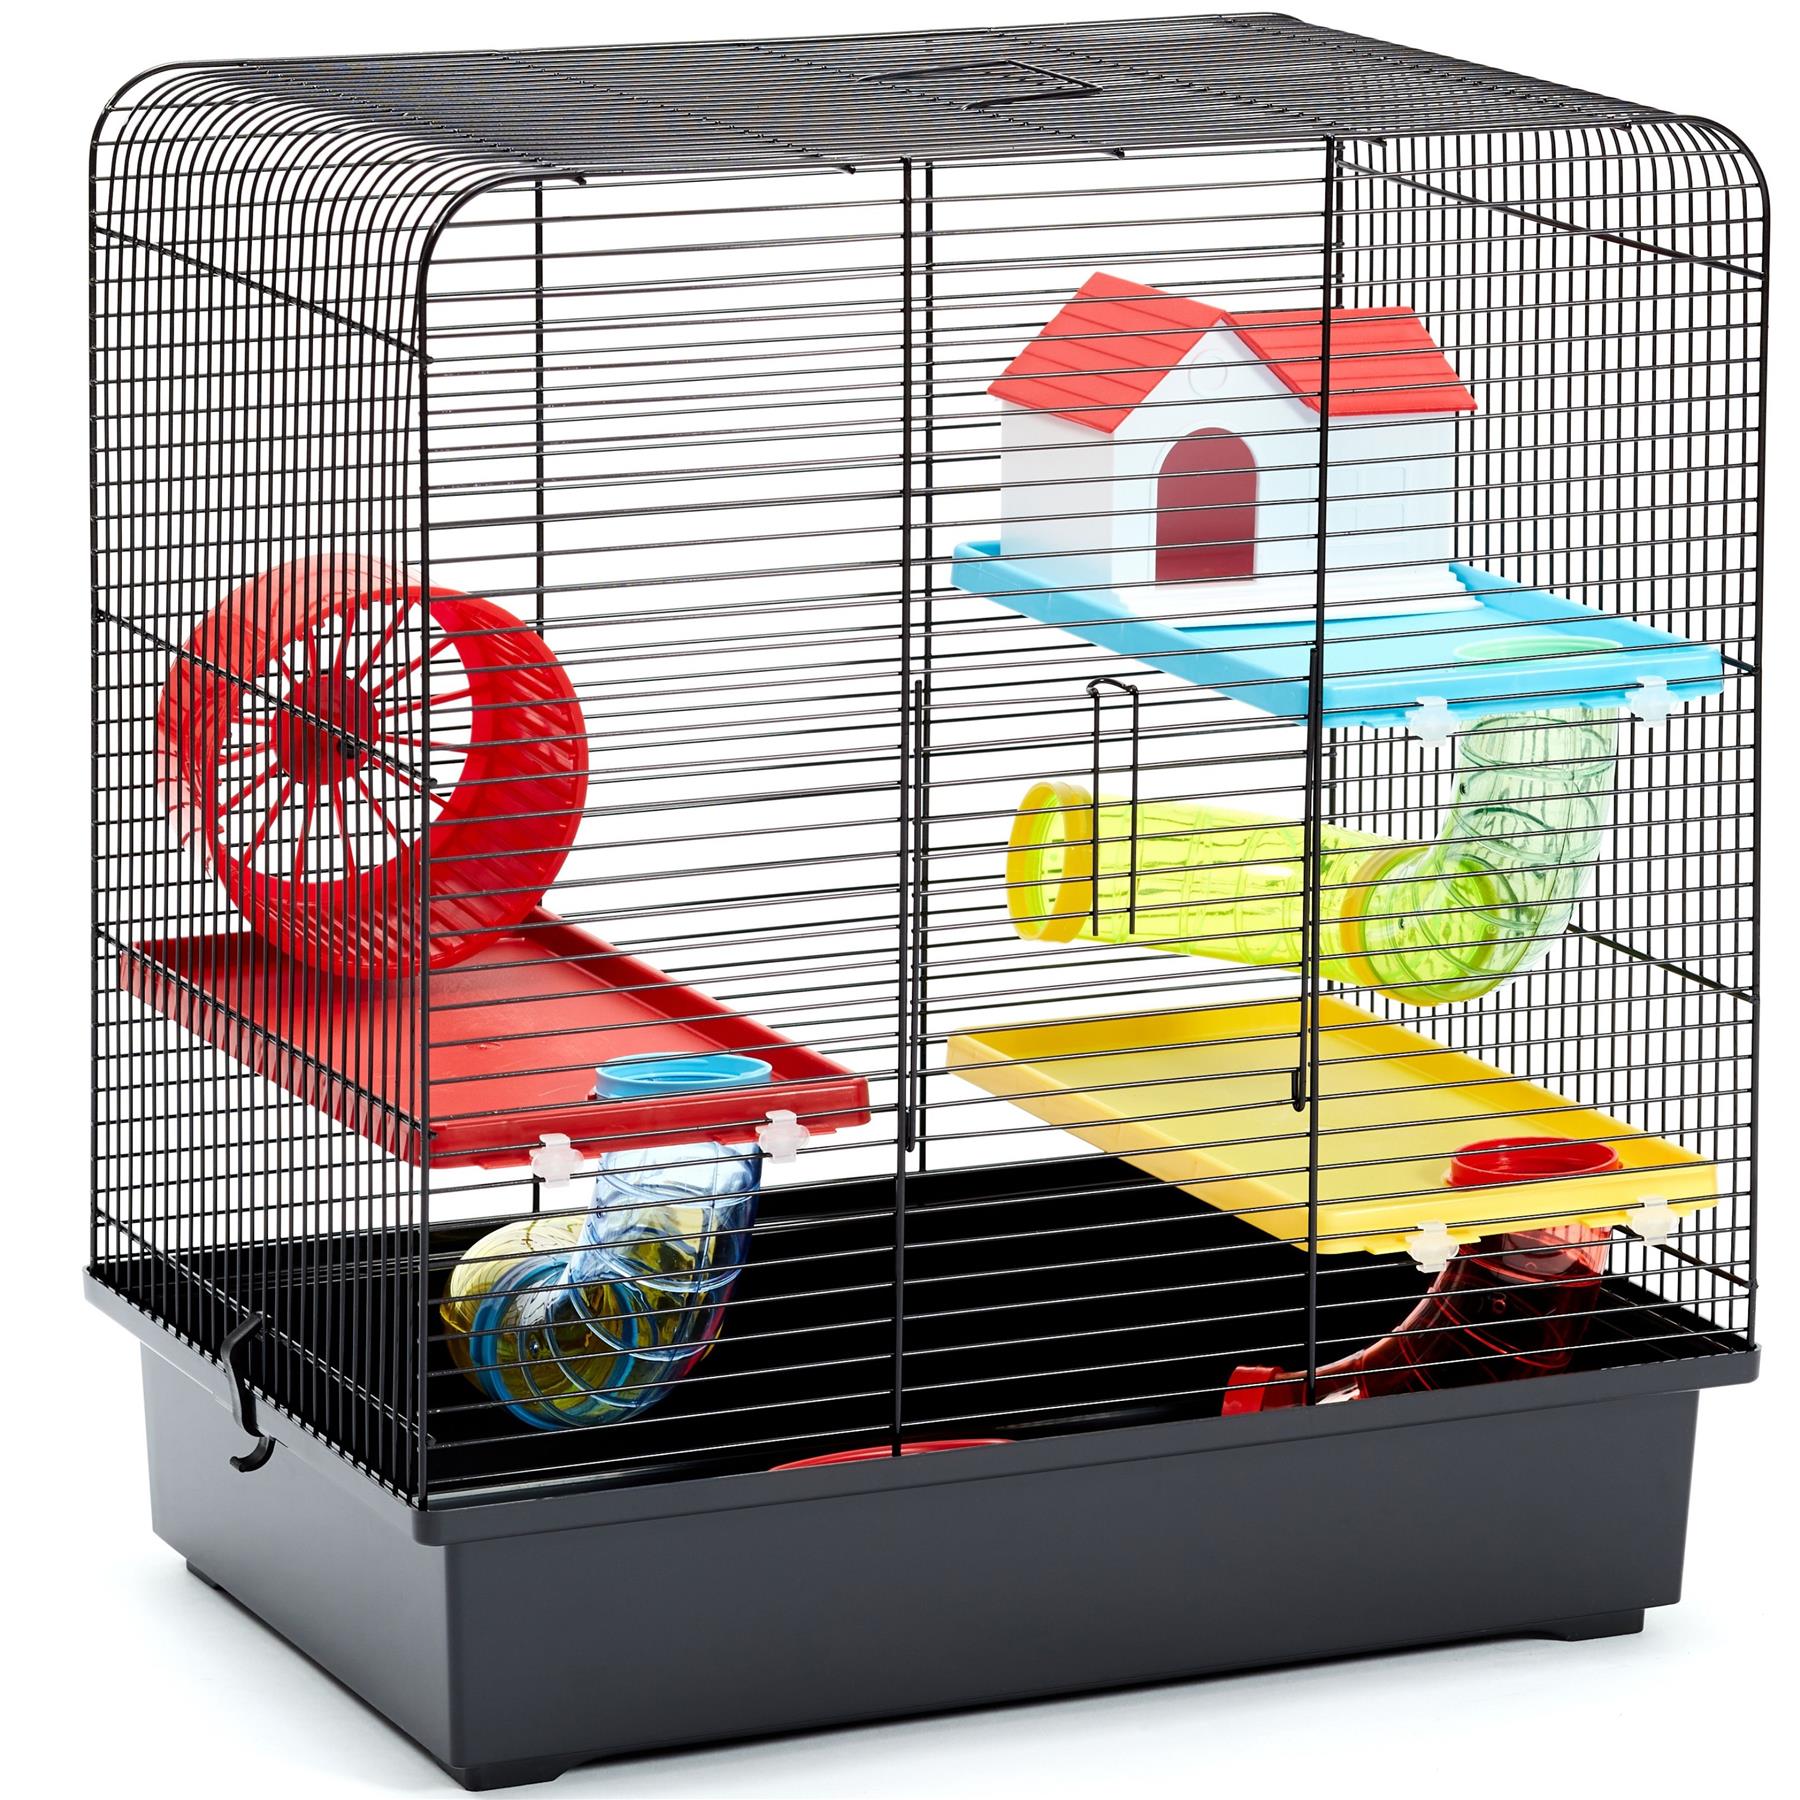 3-Tier Large Hamster Cage With Slide Hamster Tubes, Tunnel, Hamster Wheel, For Small Animal Mouse, Gerbil, Rodents - Hamster House with Accessories